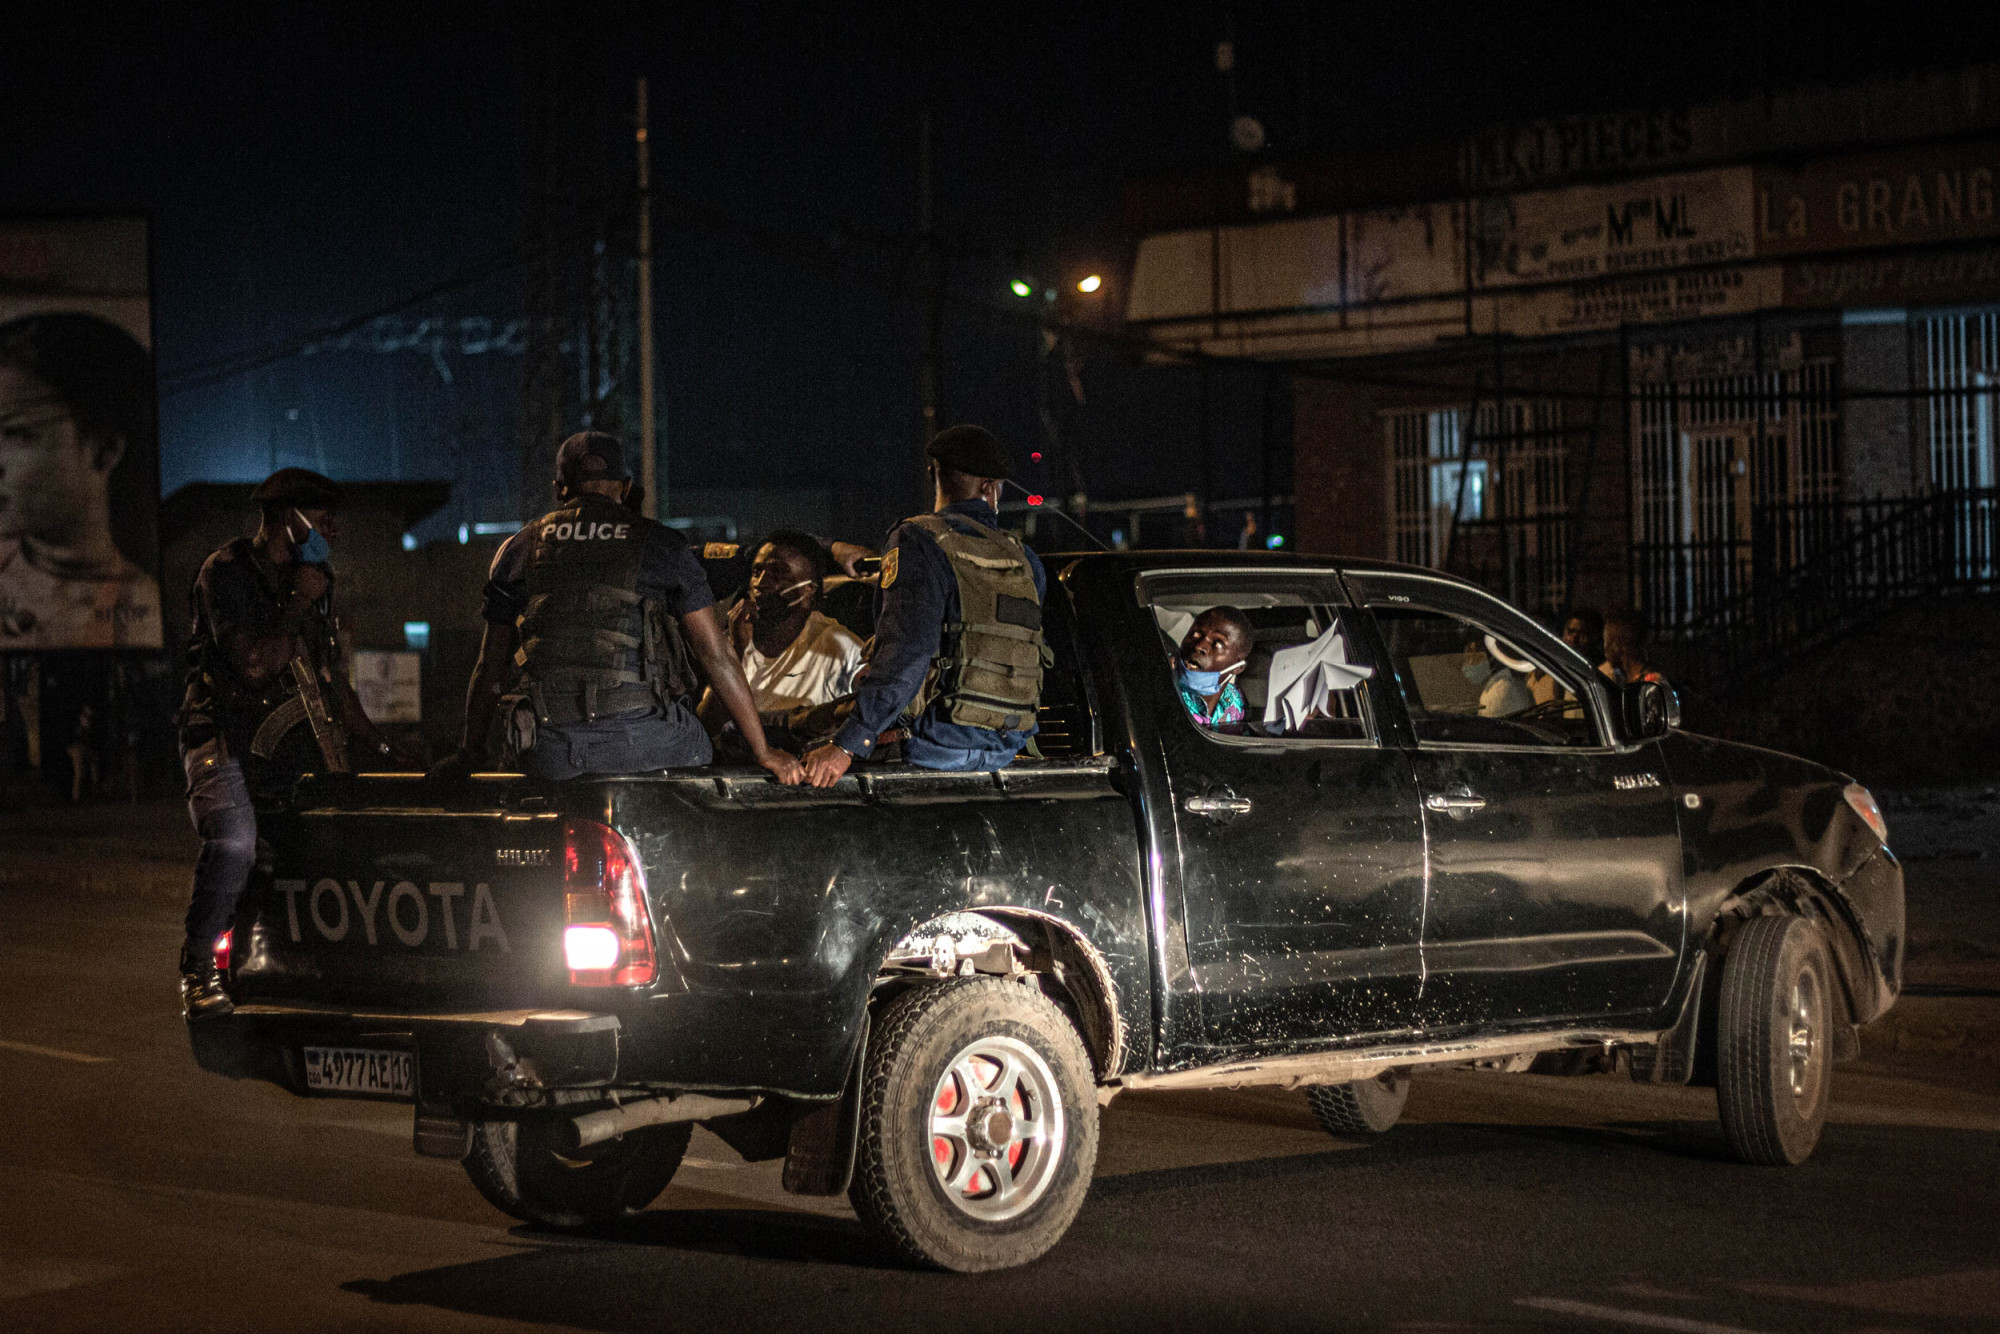 Goma, DRC, May 20th, 2020. Police take away detainees arrested for breaking a new curfew imposed to limit the spread of coronavirus in the eastern Congolese city of Goma on Wednesday. © Guerchom Ndebo for Fondation Carmignac